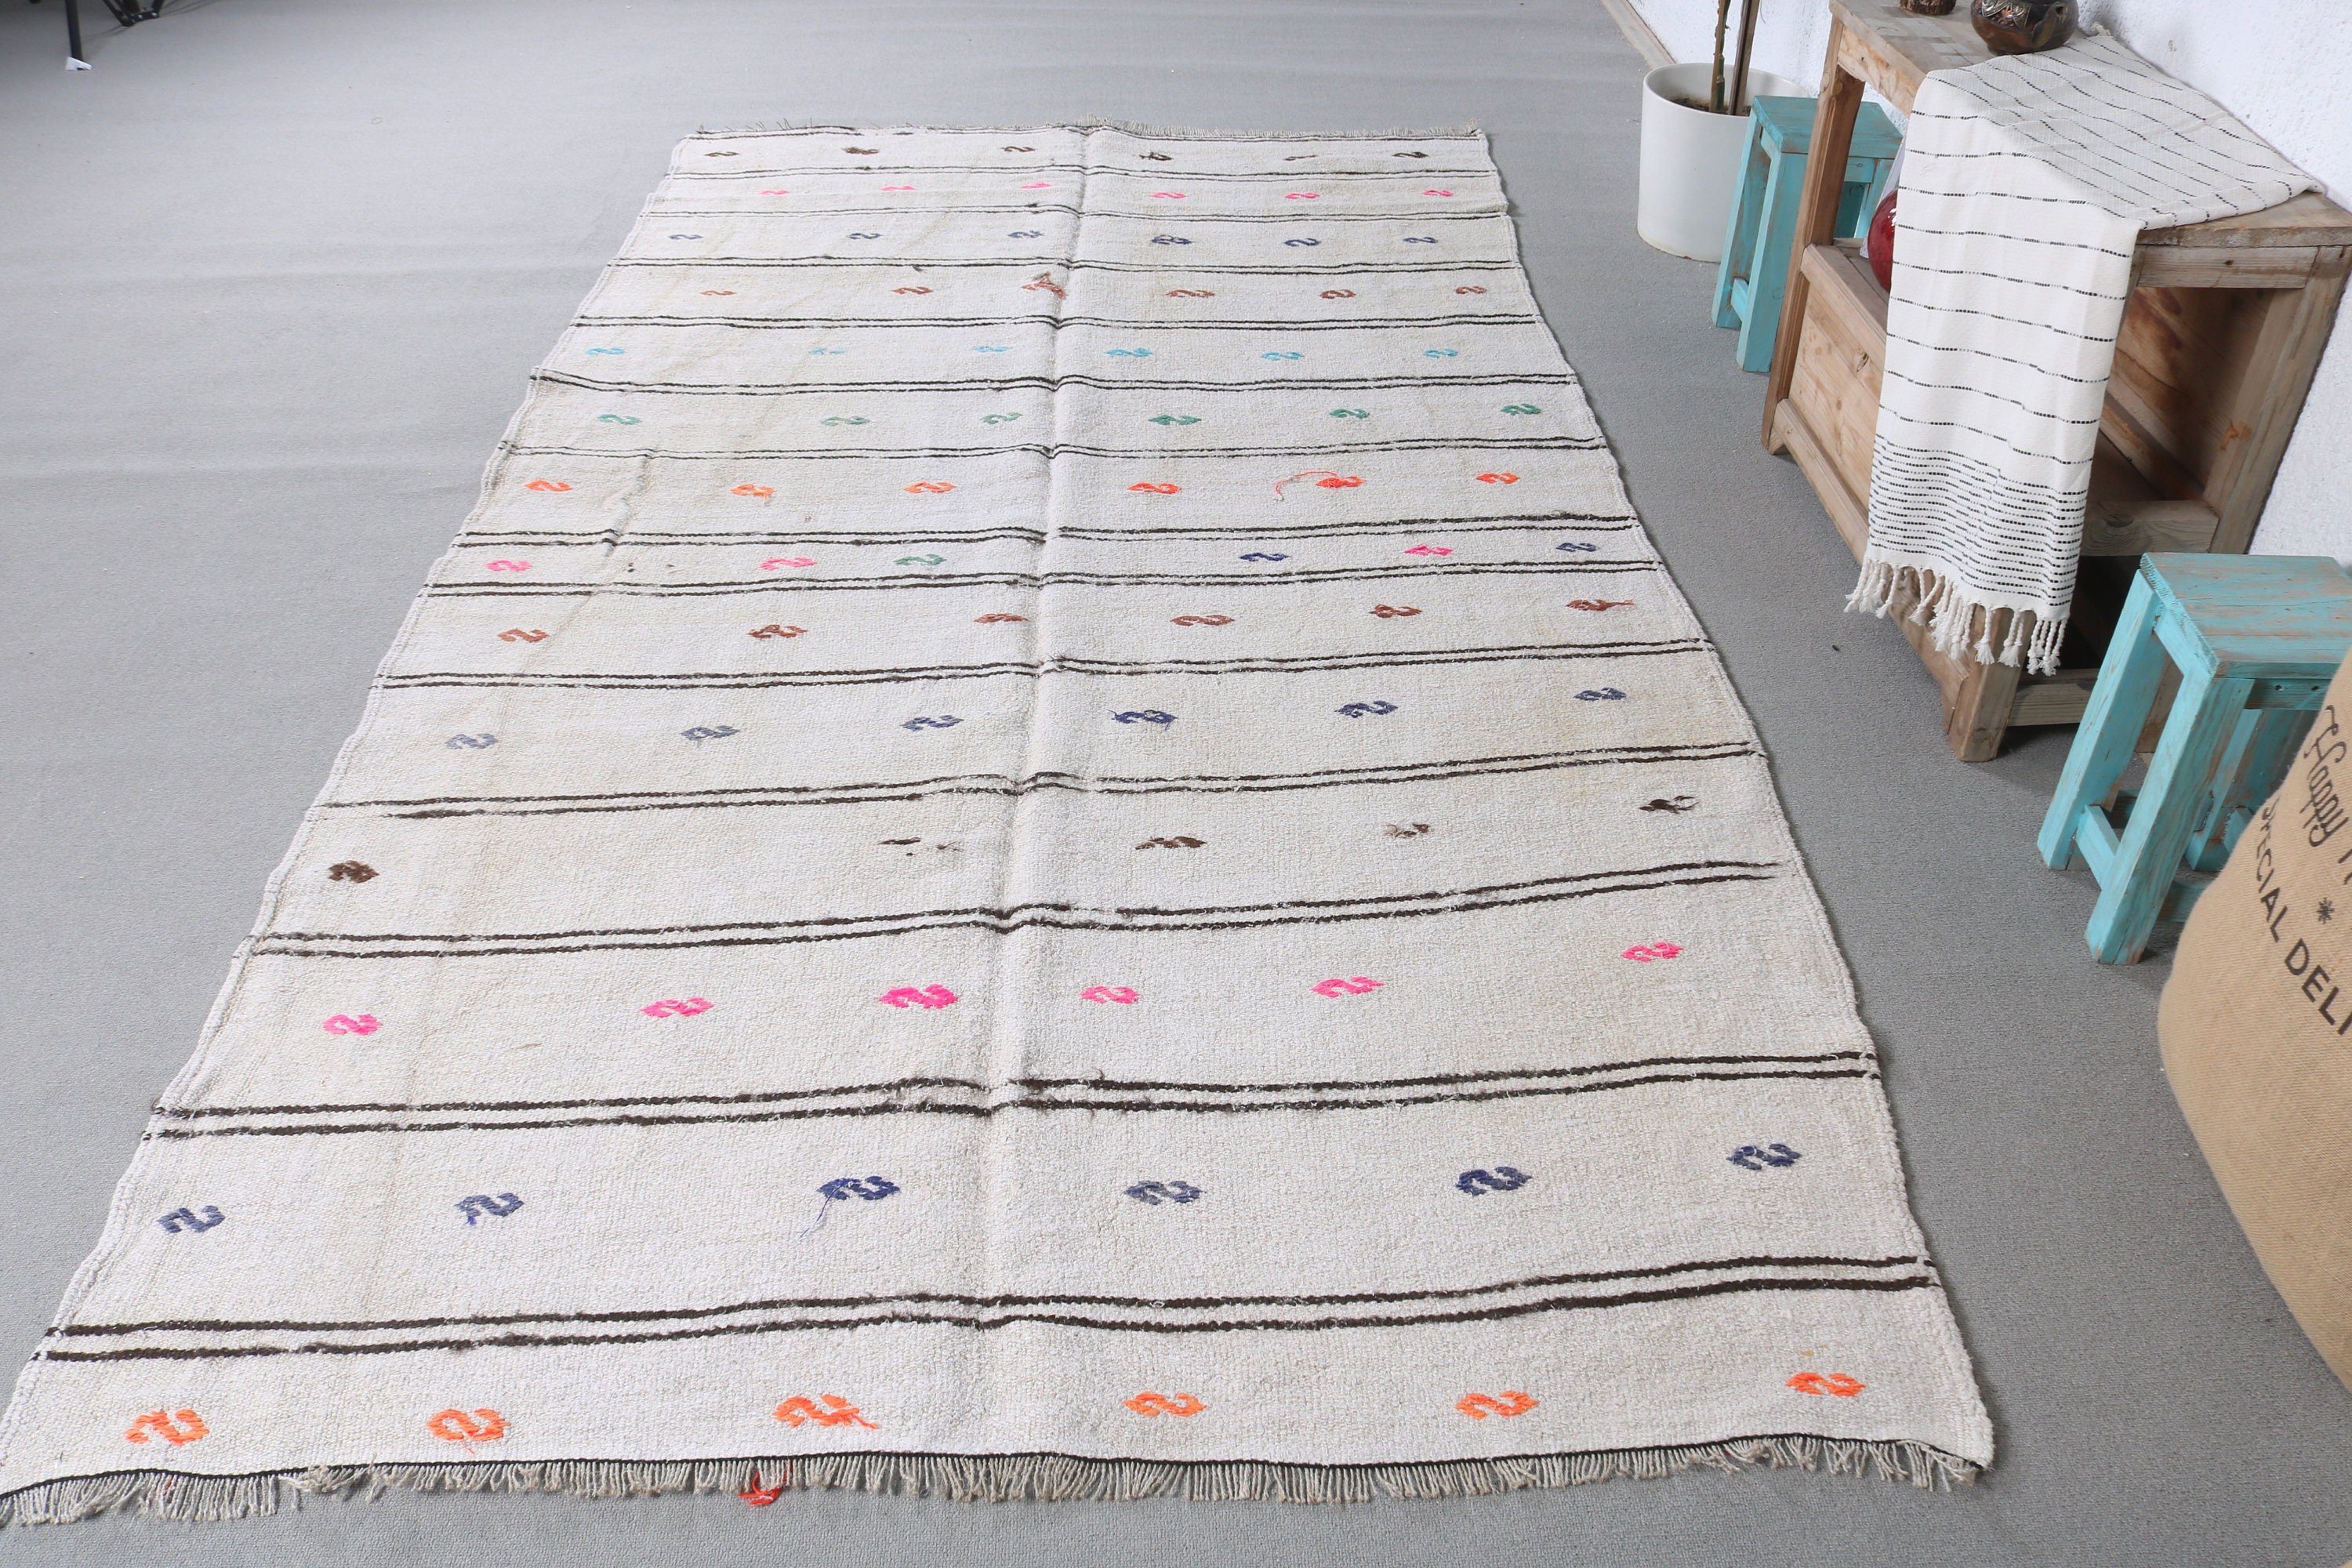 Salon Rug, Turkish Rugs, Pale Rugs, Moroccan Rug, 5.2x9.6 ft Large Rug, Home Decor Rugs, Beige Kitchen Rugs, Vintage Rug, Dining Room Rugs